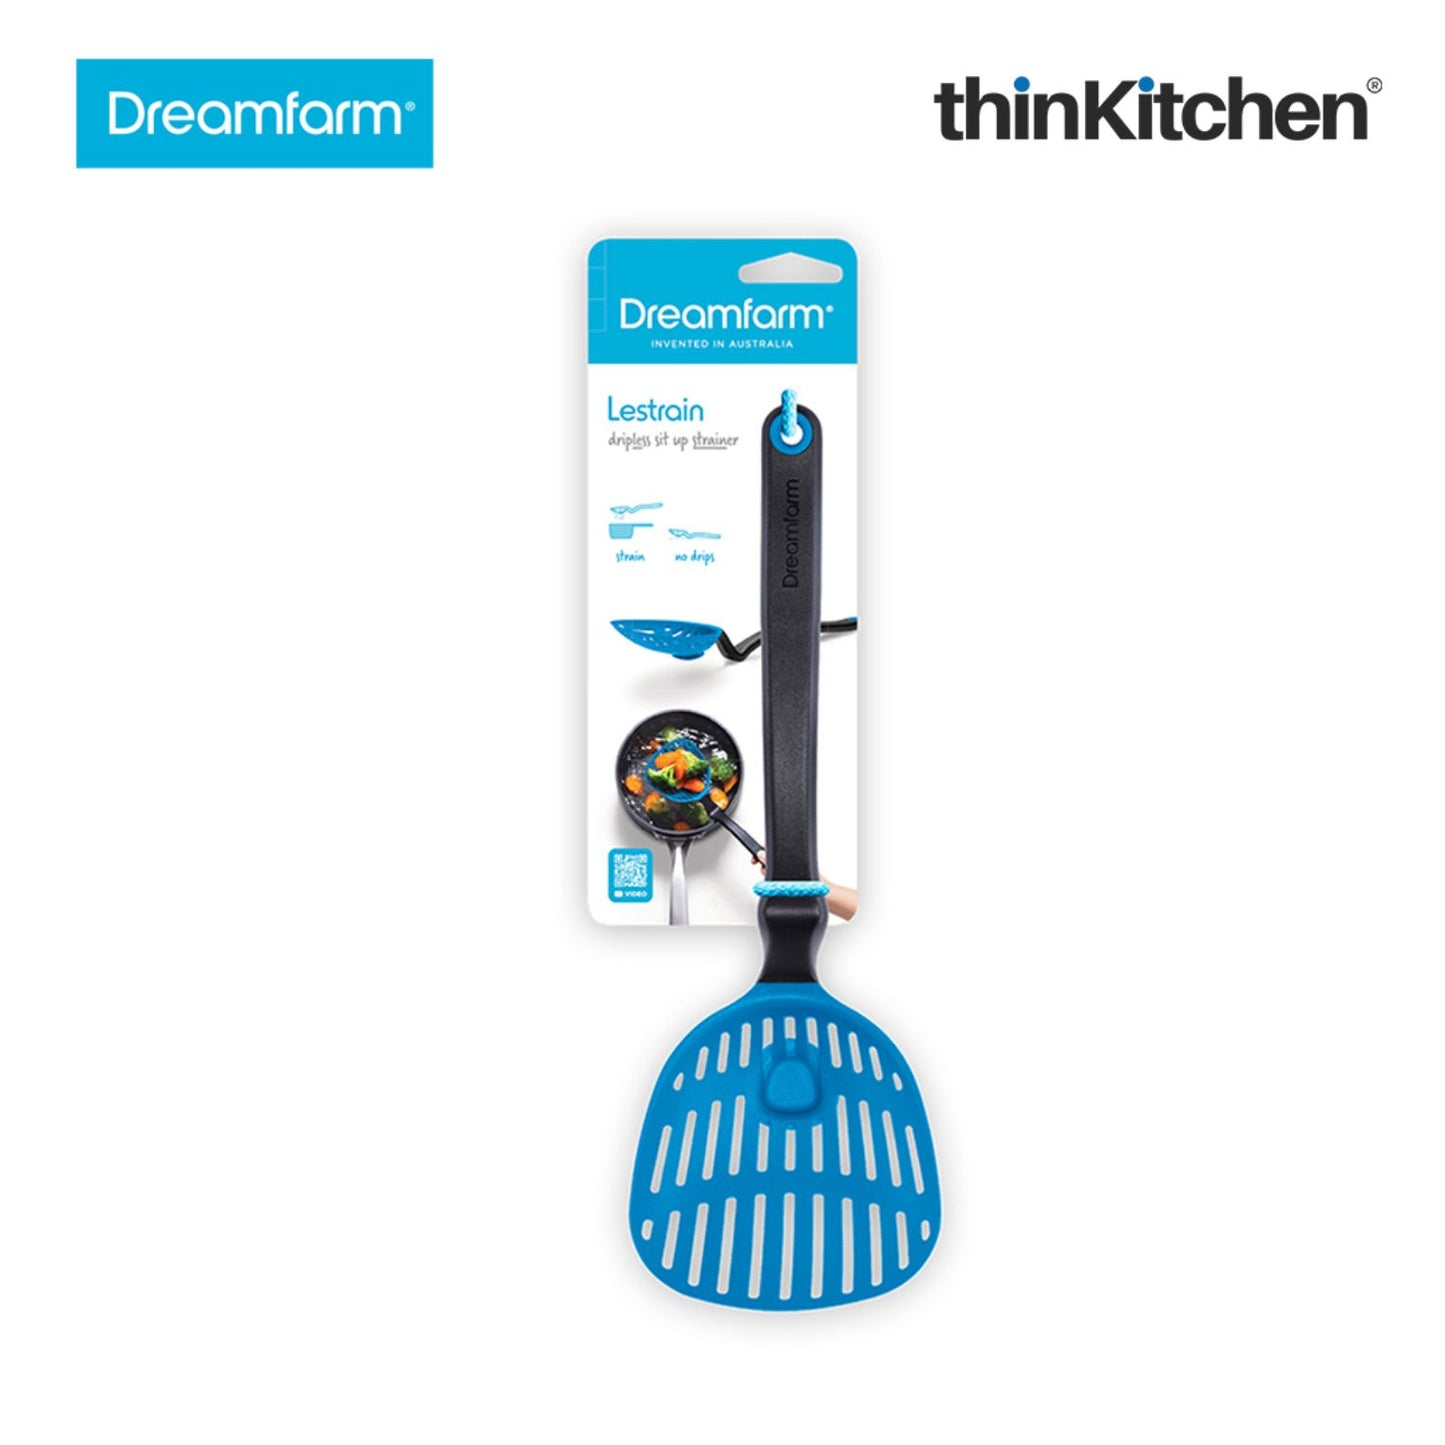 Dreamfarm Lestrain Drip Catching Sit Up Scoop Strainer Keeps Bench Tops Mess Free Flexible Dripless Slotted Spoon Food Strainer Blue